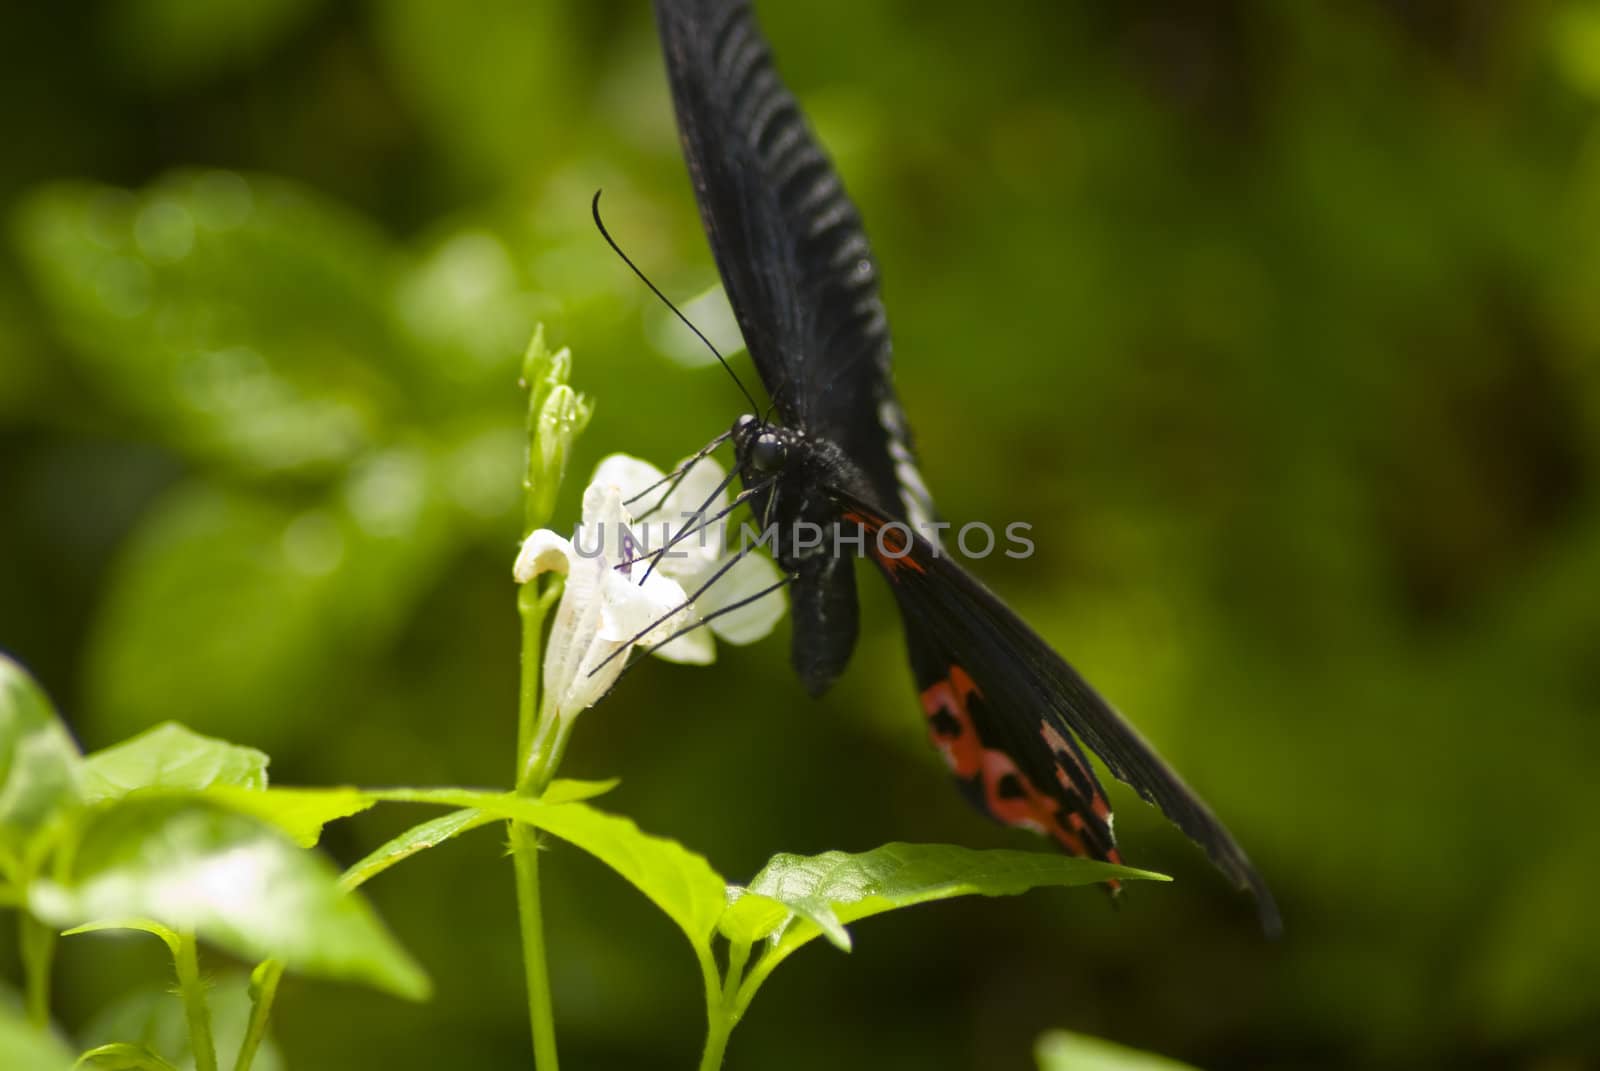 Black and red butterfly sitting on a white flower with a green background